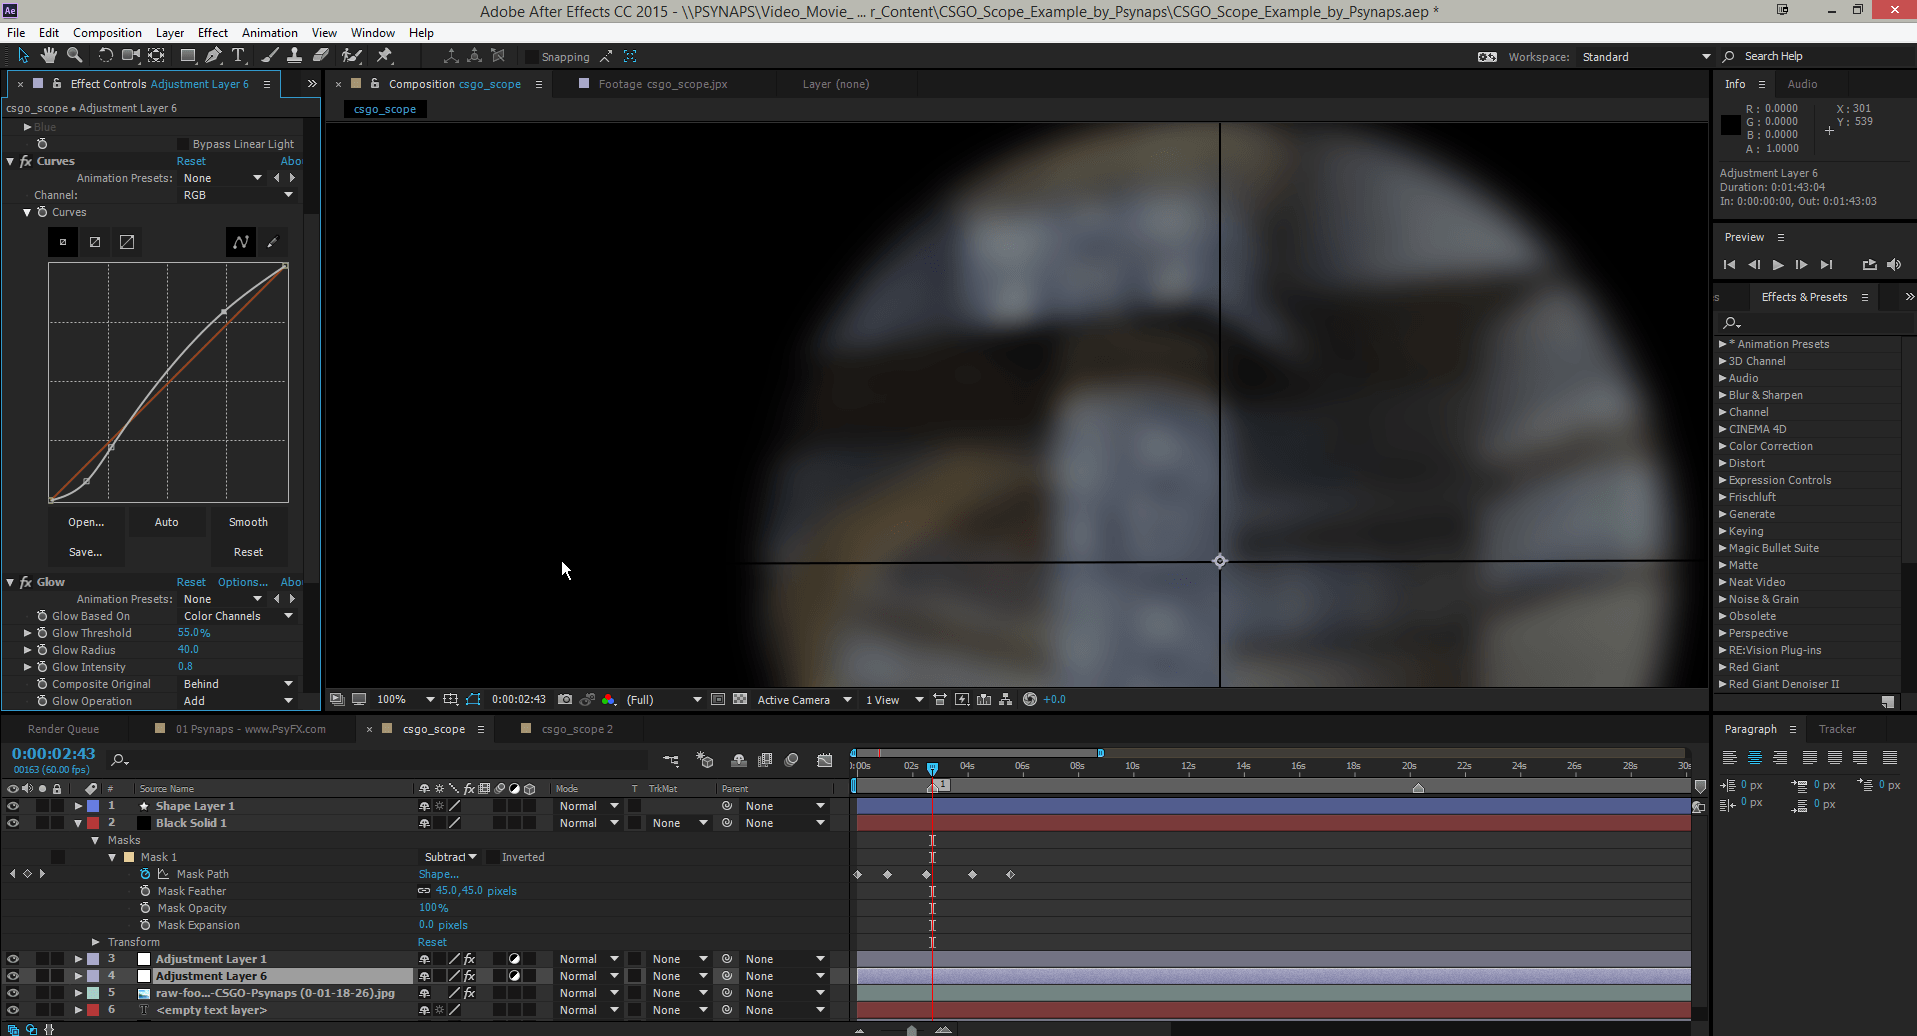 CSGO Scope Overlay: After Effects Project File Download